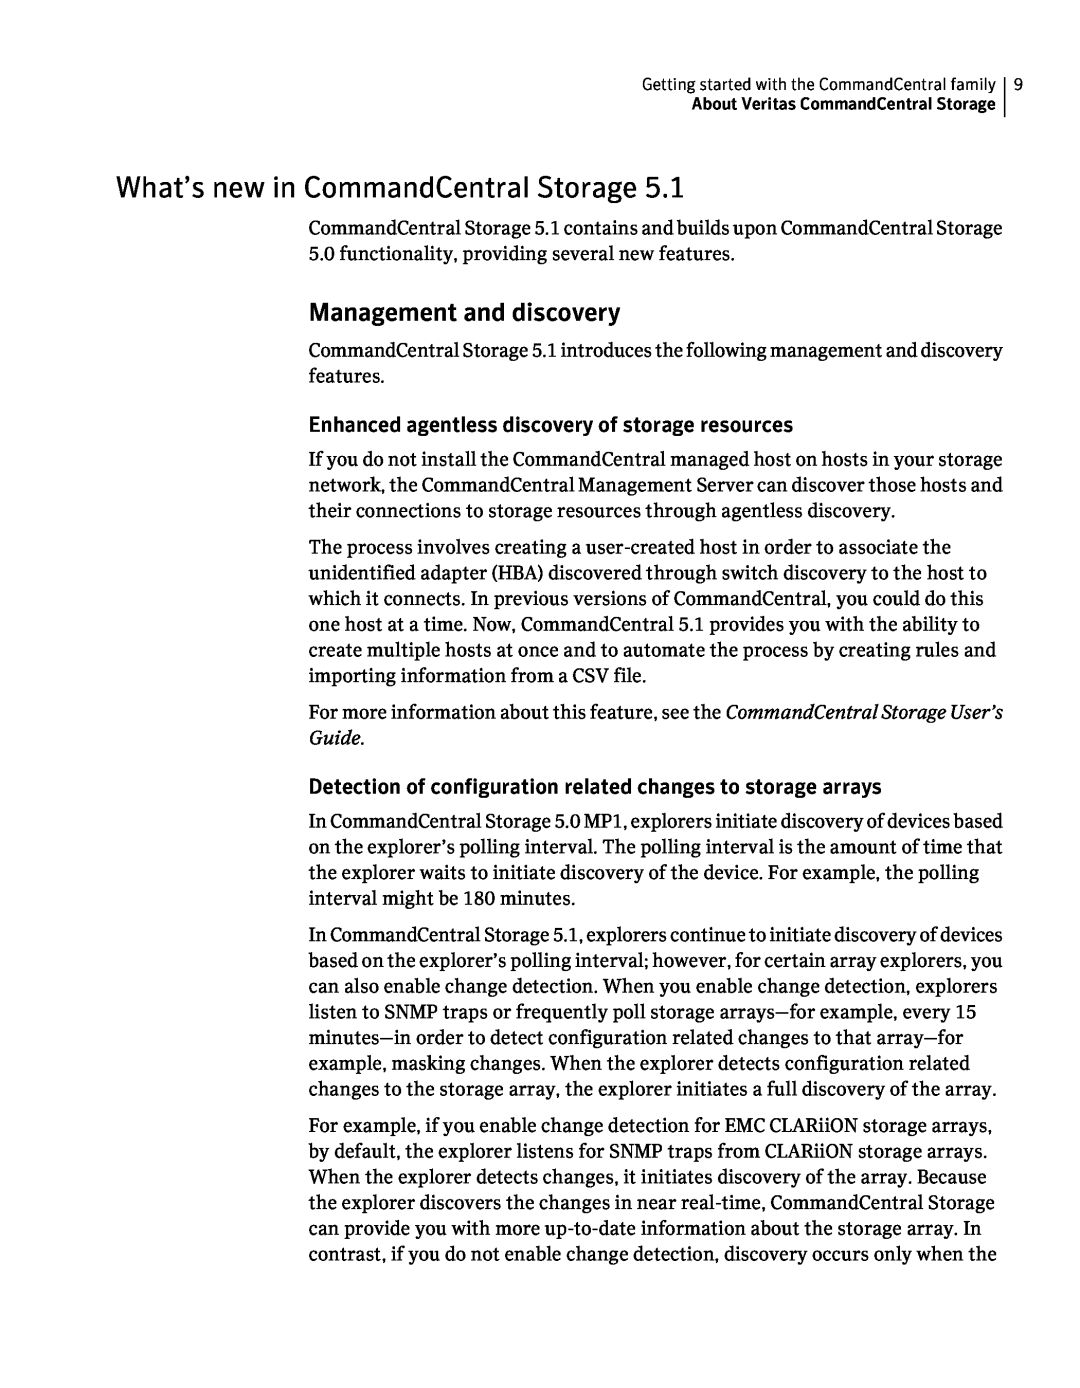 Symantec 5.1 manual What’s new in CommandCentral Storage, Management and discovery 